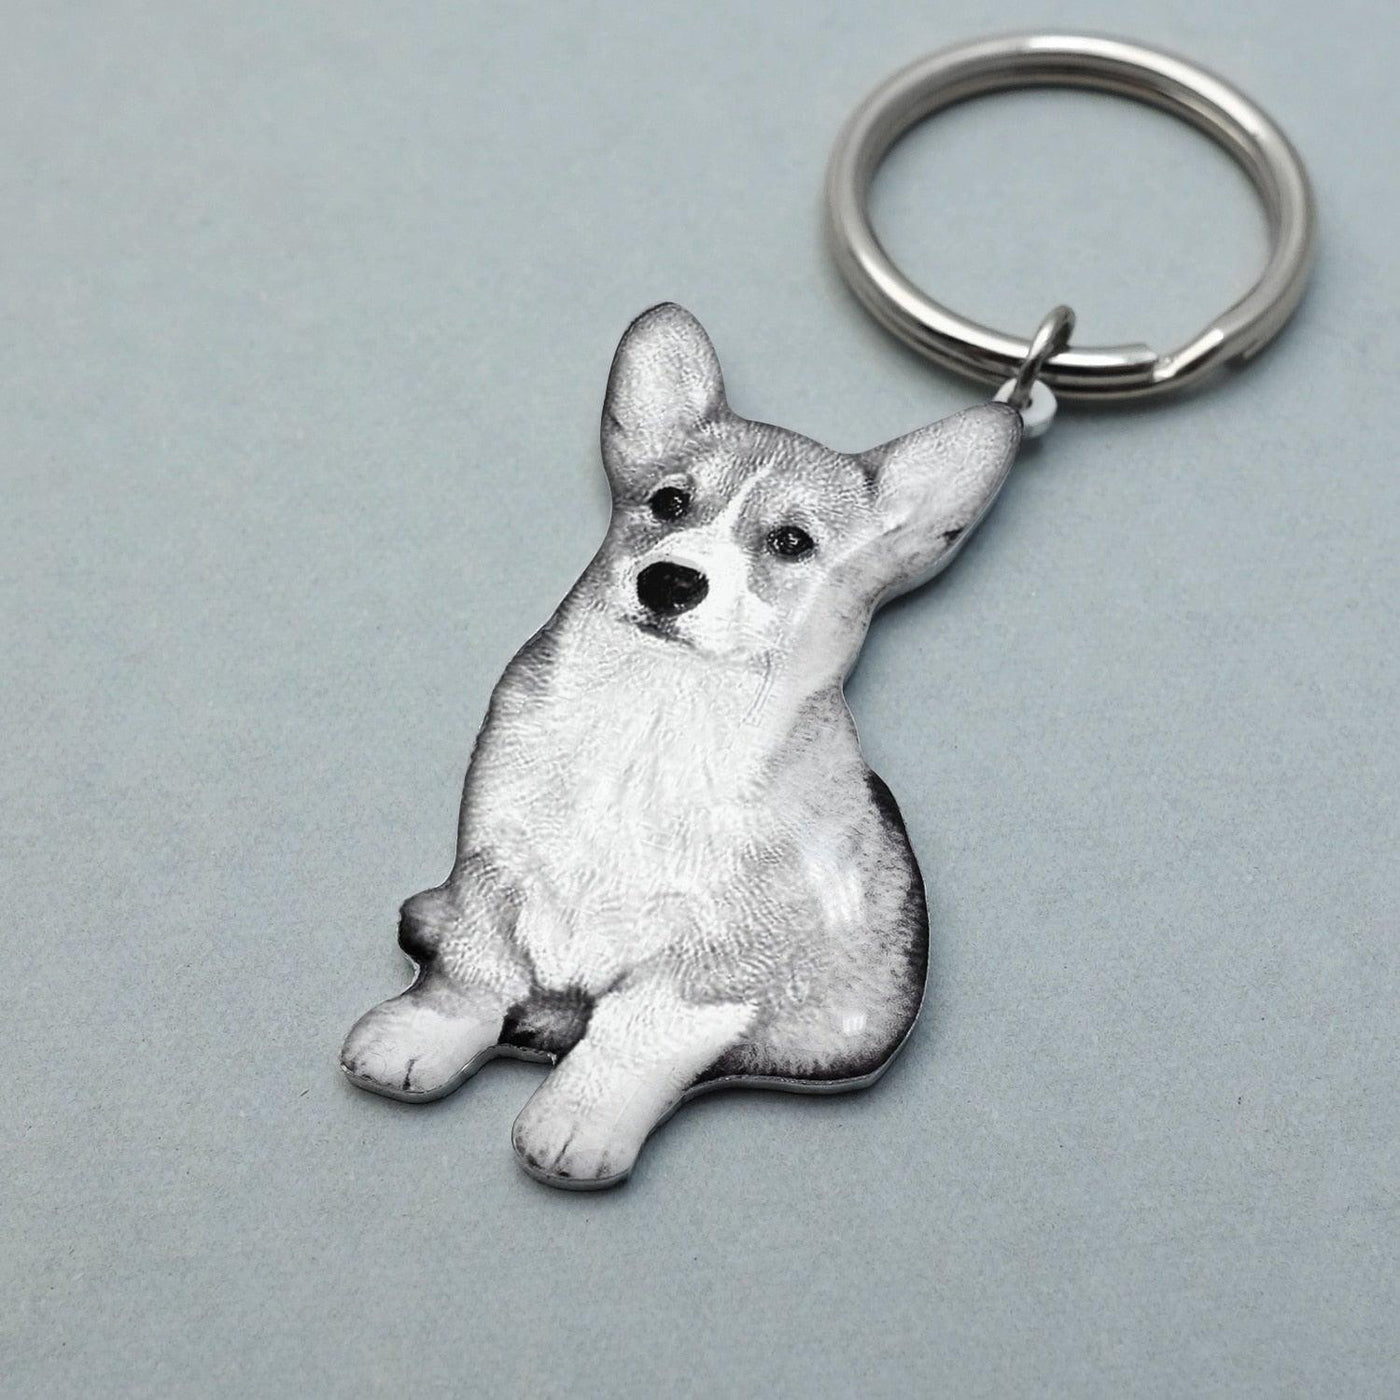 Personalized Photo Engraved Dog Memorial Keychain - furry-angles